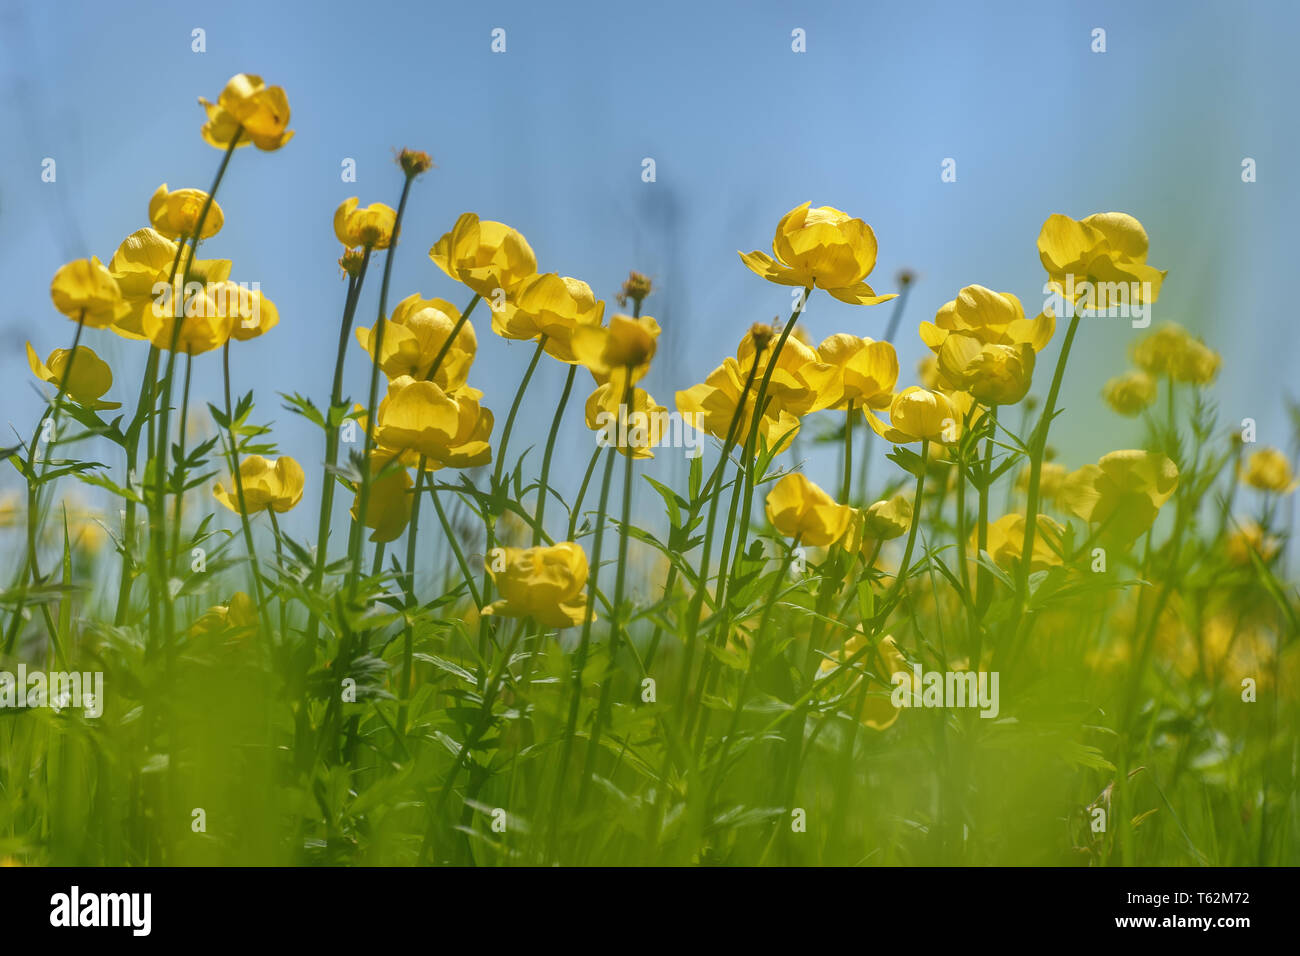 Amazing bright yellow wild flowers Trollius europaeus on a green meadow close up on the background of the blue sky Stock Photo